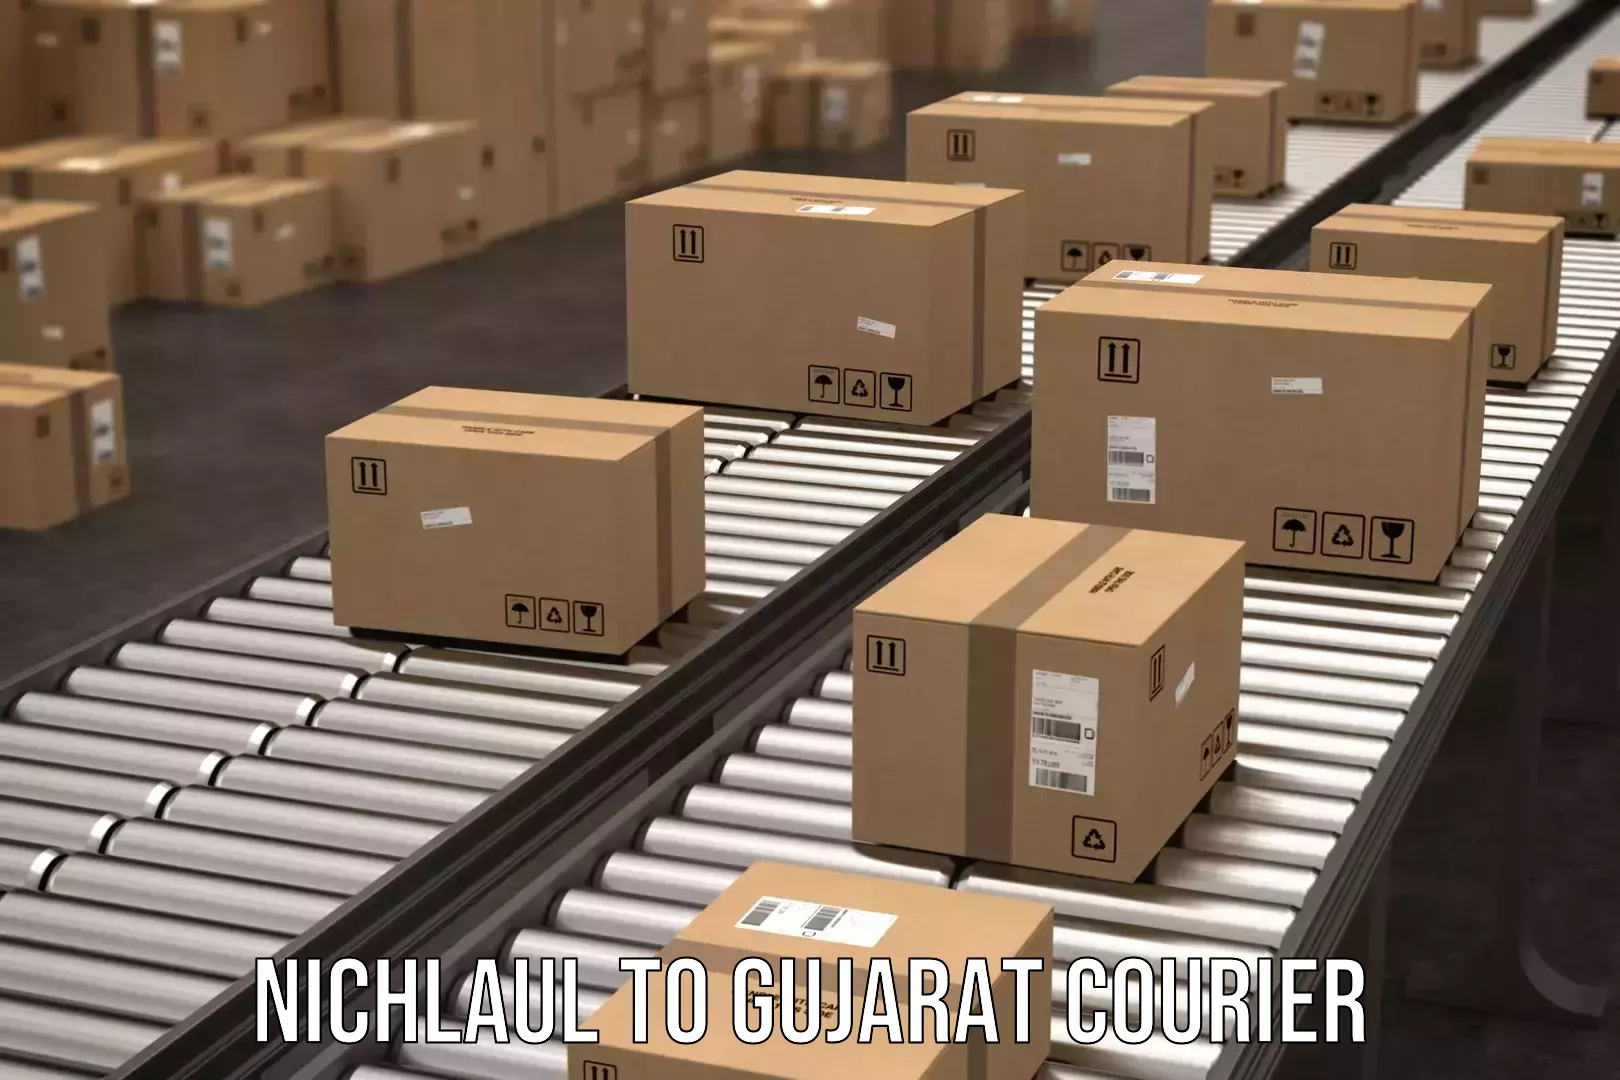 Express courier facilities Nichlaul to Surat